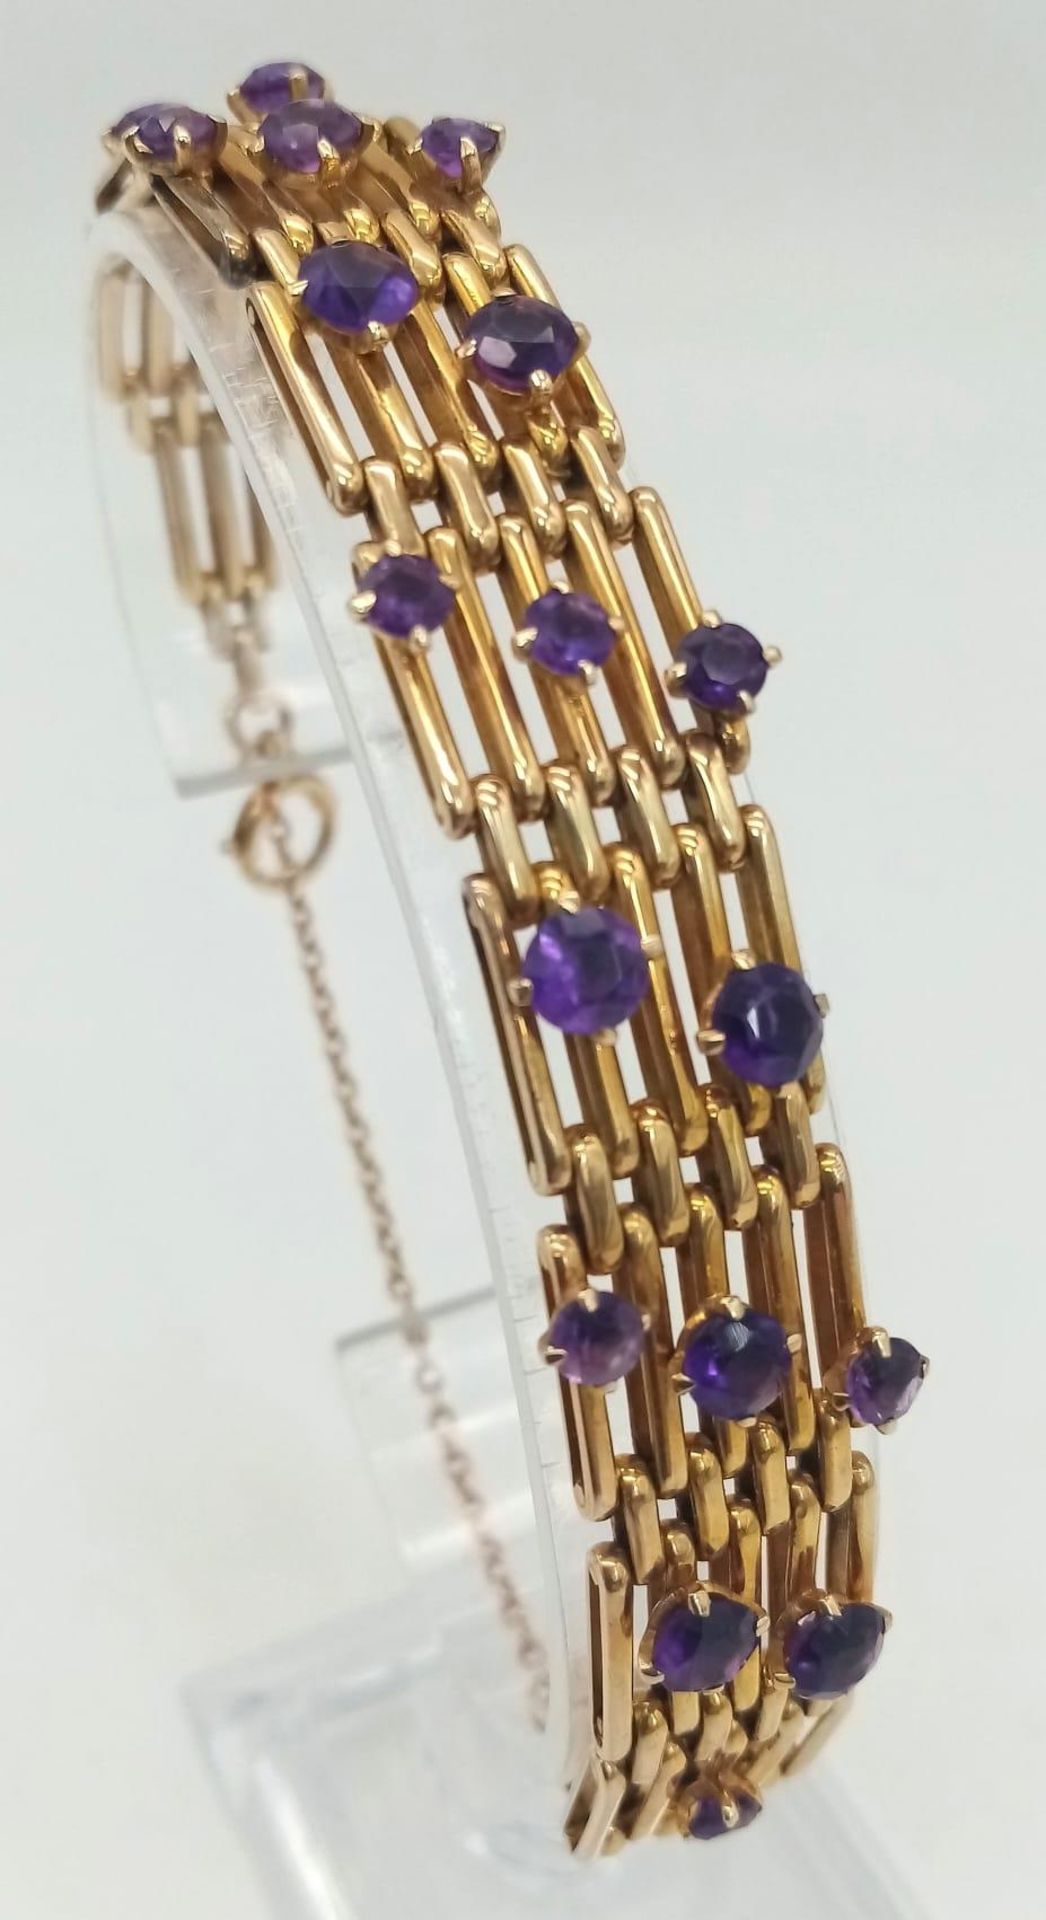 A Vintage 9K Gold and Amethyst Gate Bracelet. Beautifully constructed with 19 clean well faceted